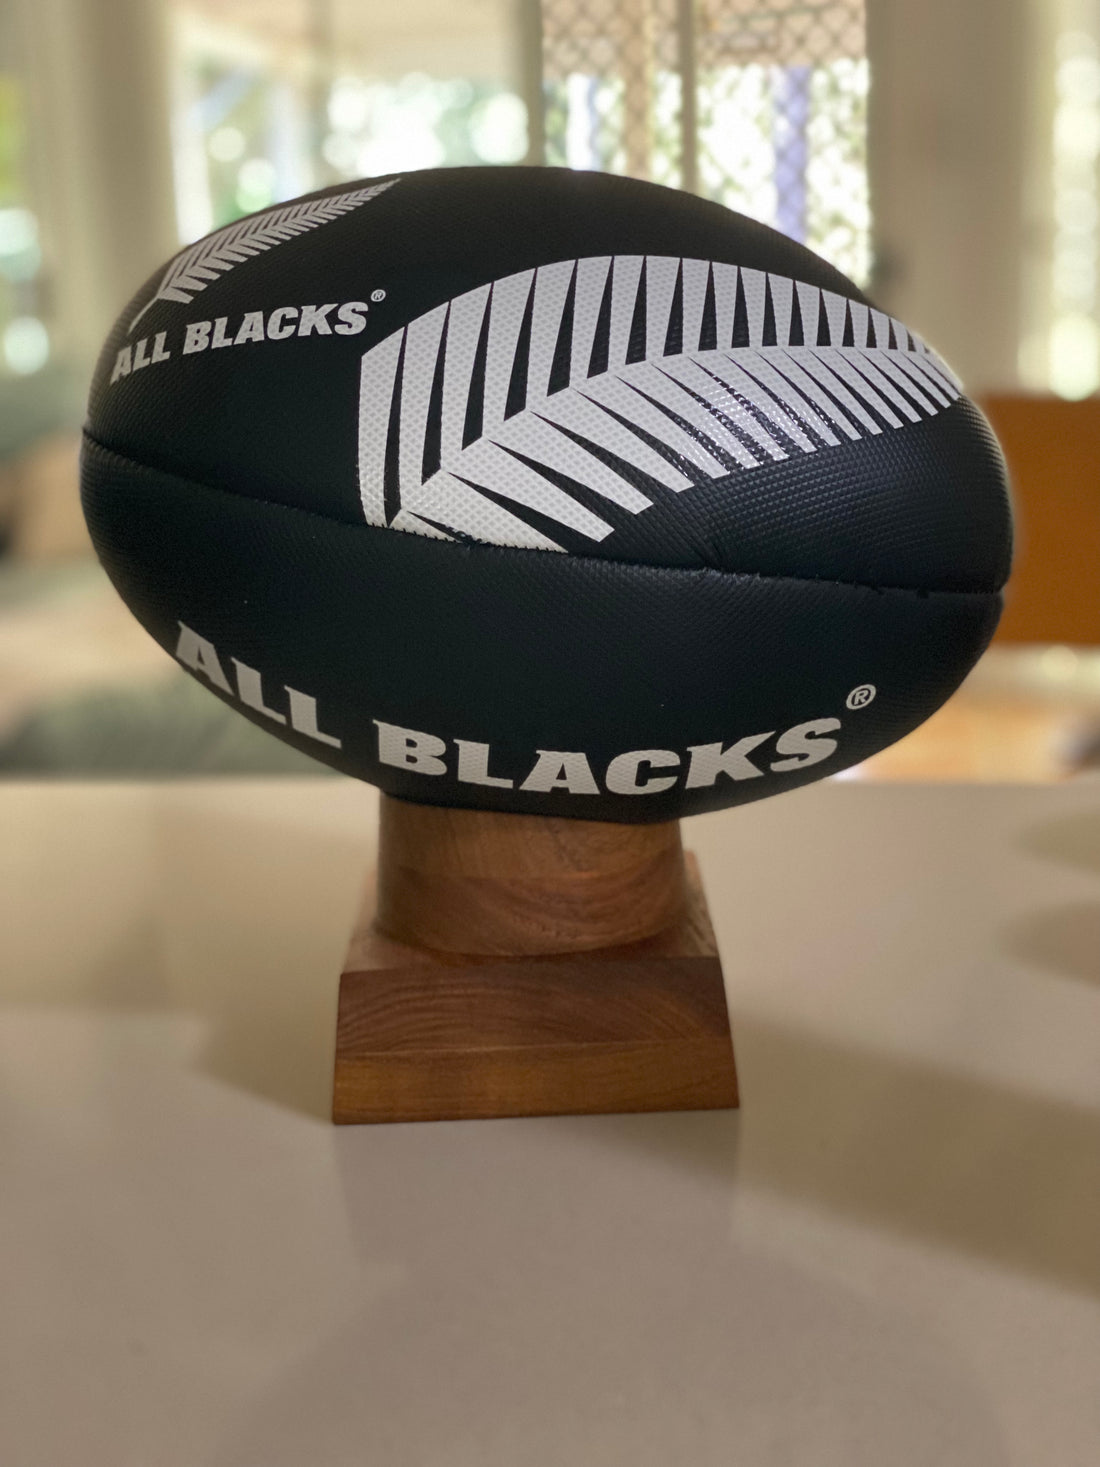 All Blacks Football Urn for Ashes with personalised timber display stand